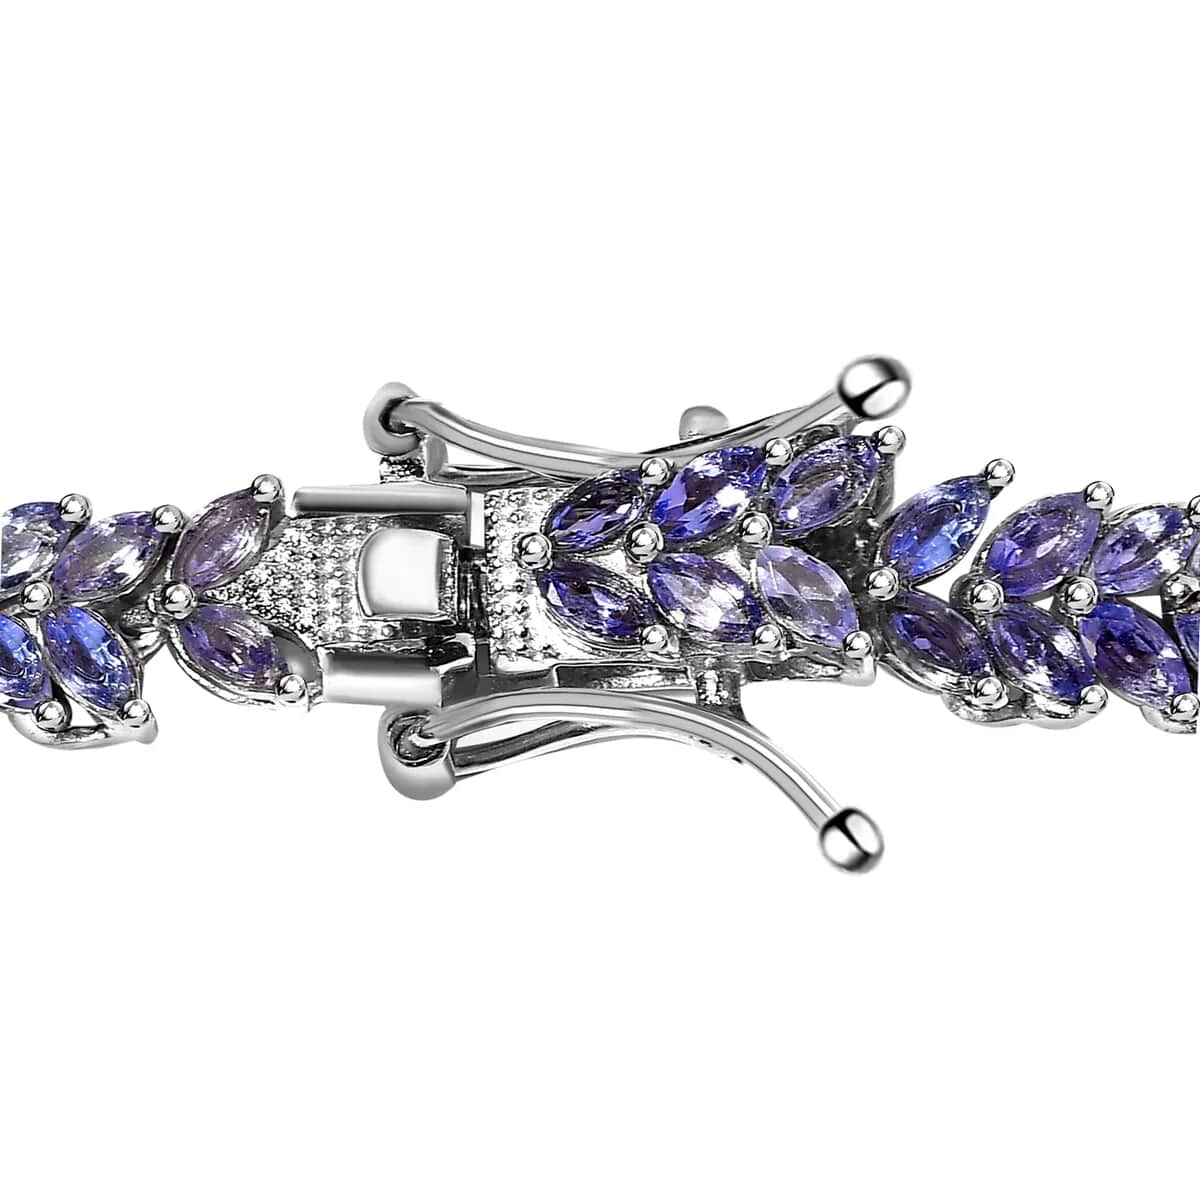 Karis Tanzanite Necklace in Platinum Bond, Double Row Necklace, Tanzanite Jewelry 20.50 ctw (18 Inches) image number 5